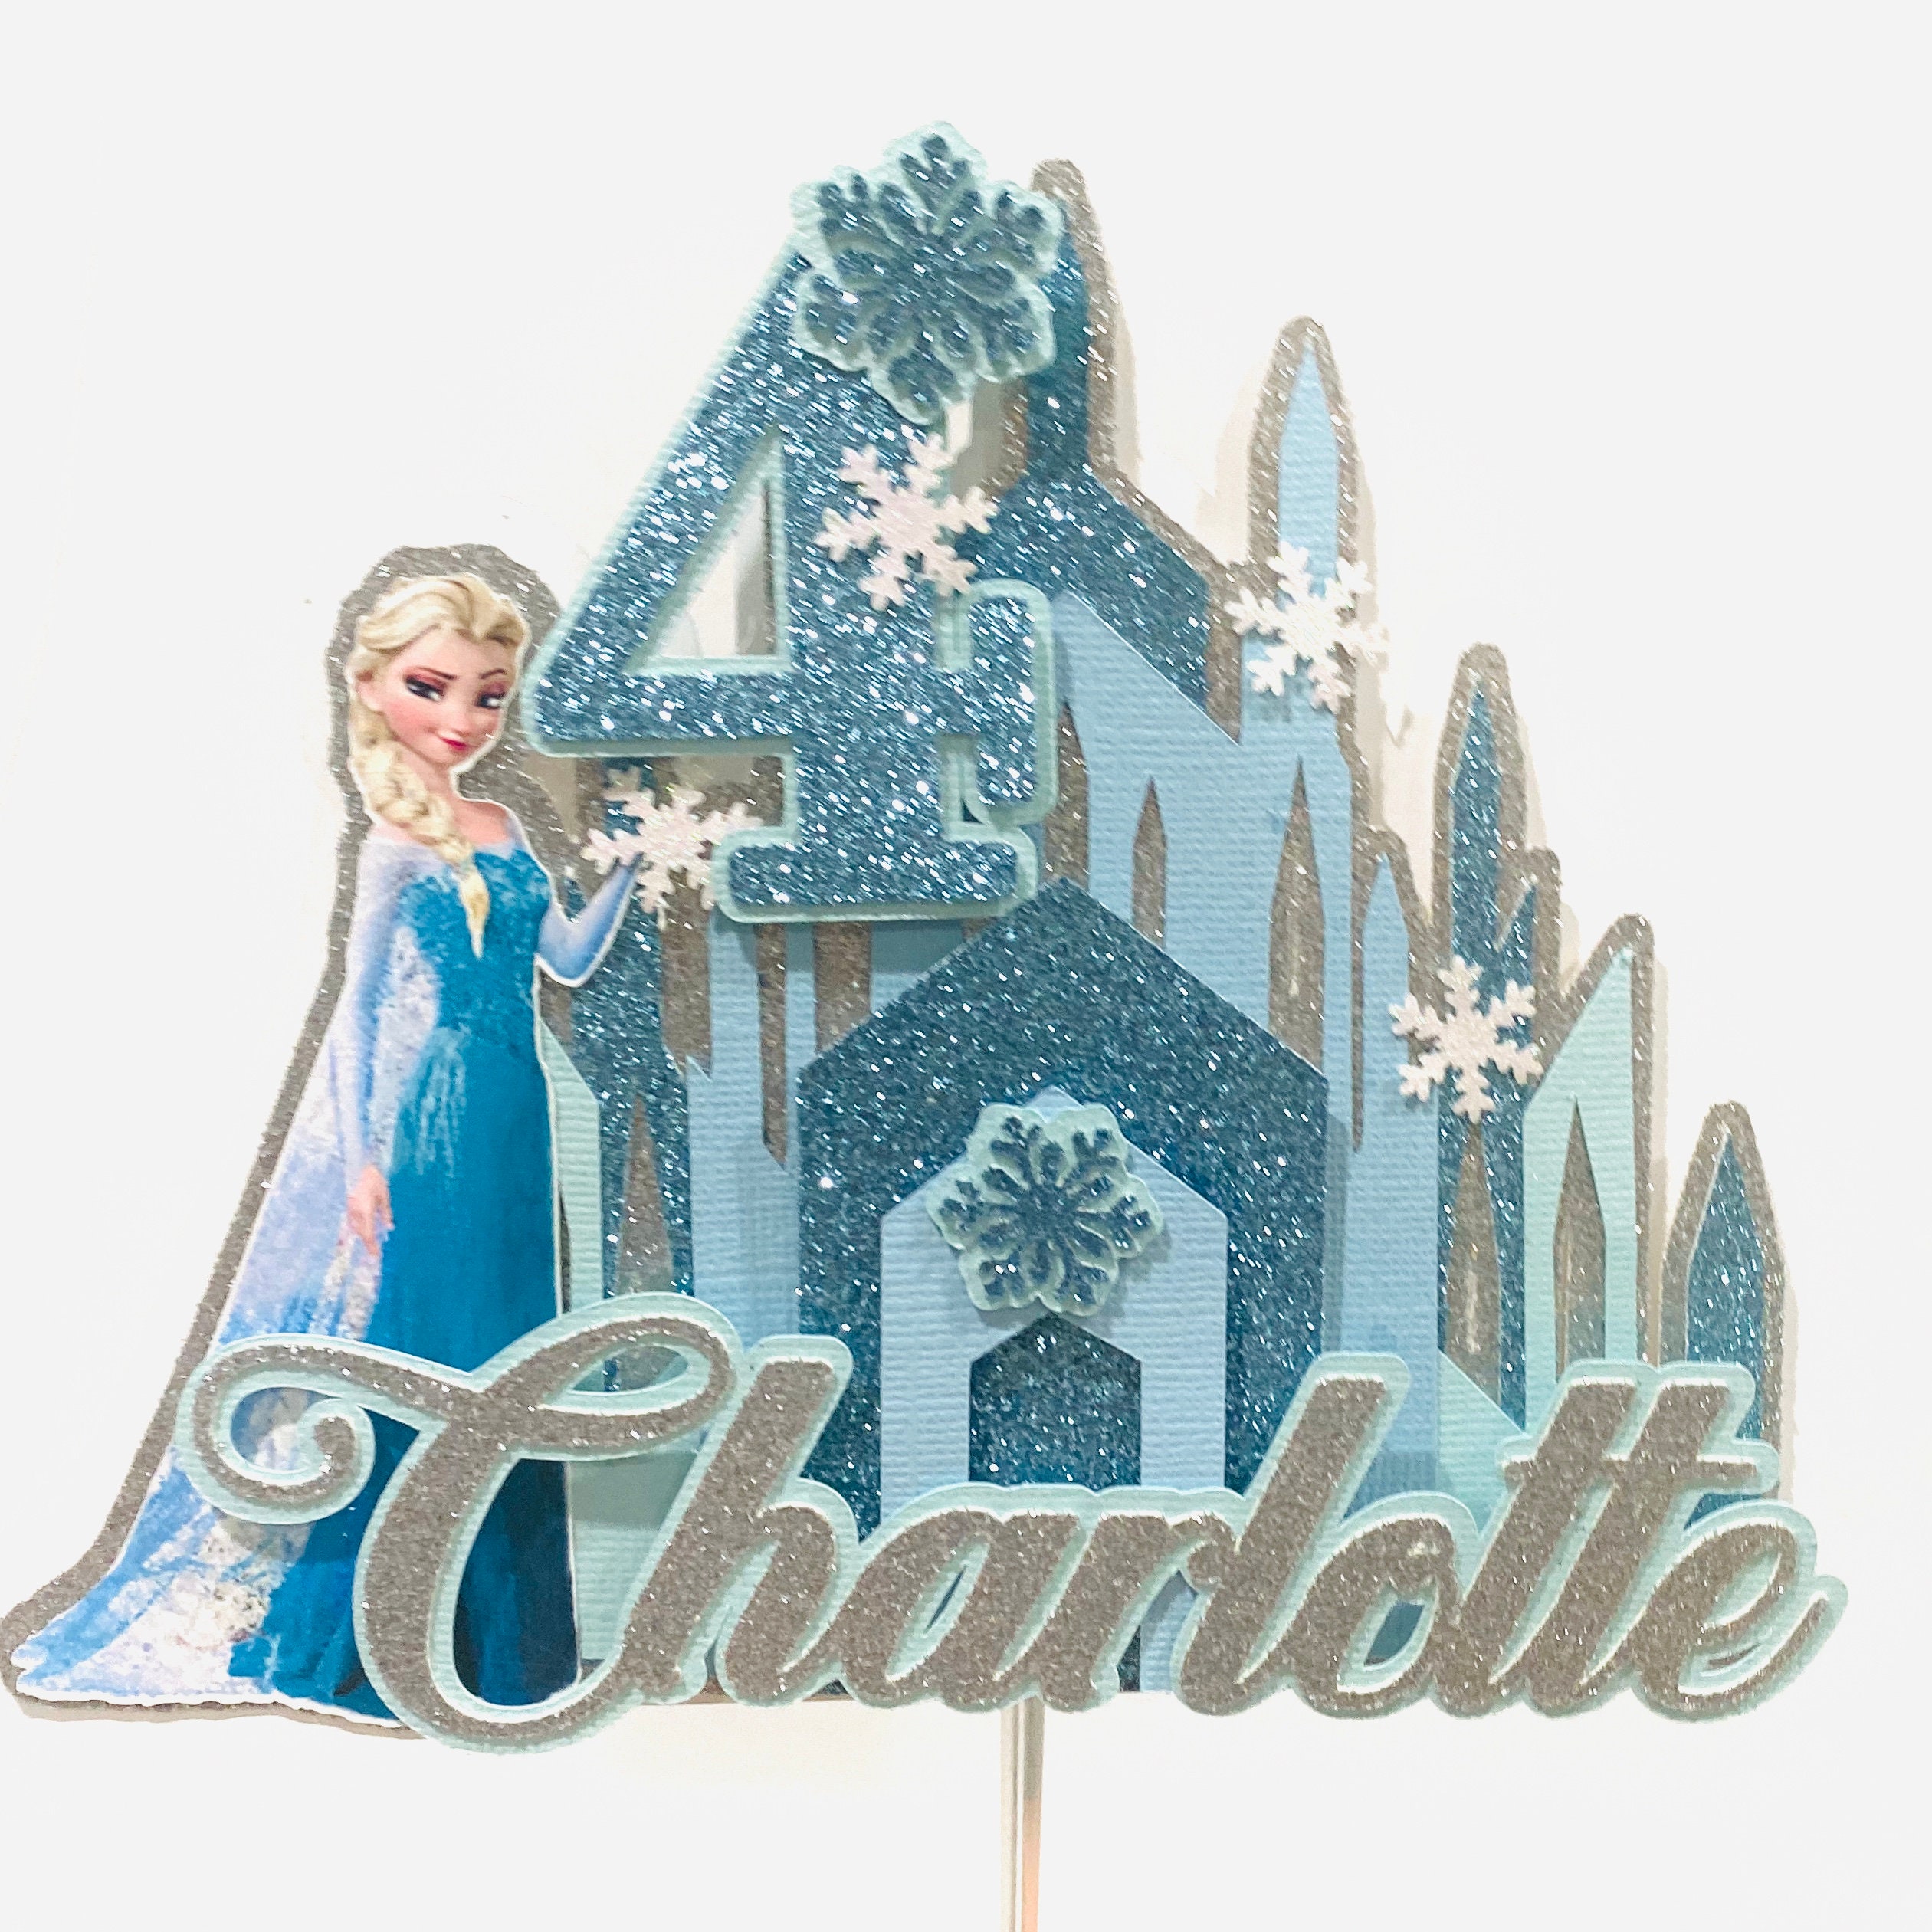 DISNEY ELSA FROZEN EDIBLE CAKE TOPPER PARTY PERSONALIZED  ICING SUGAR 7.5"  S1 